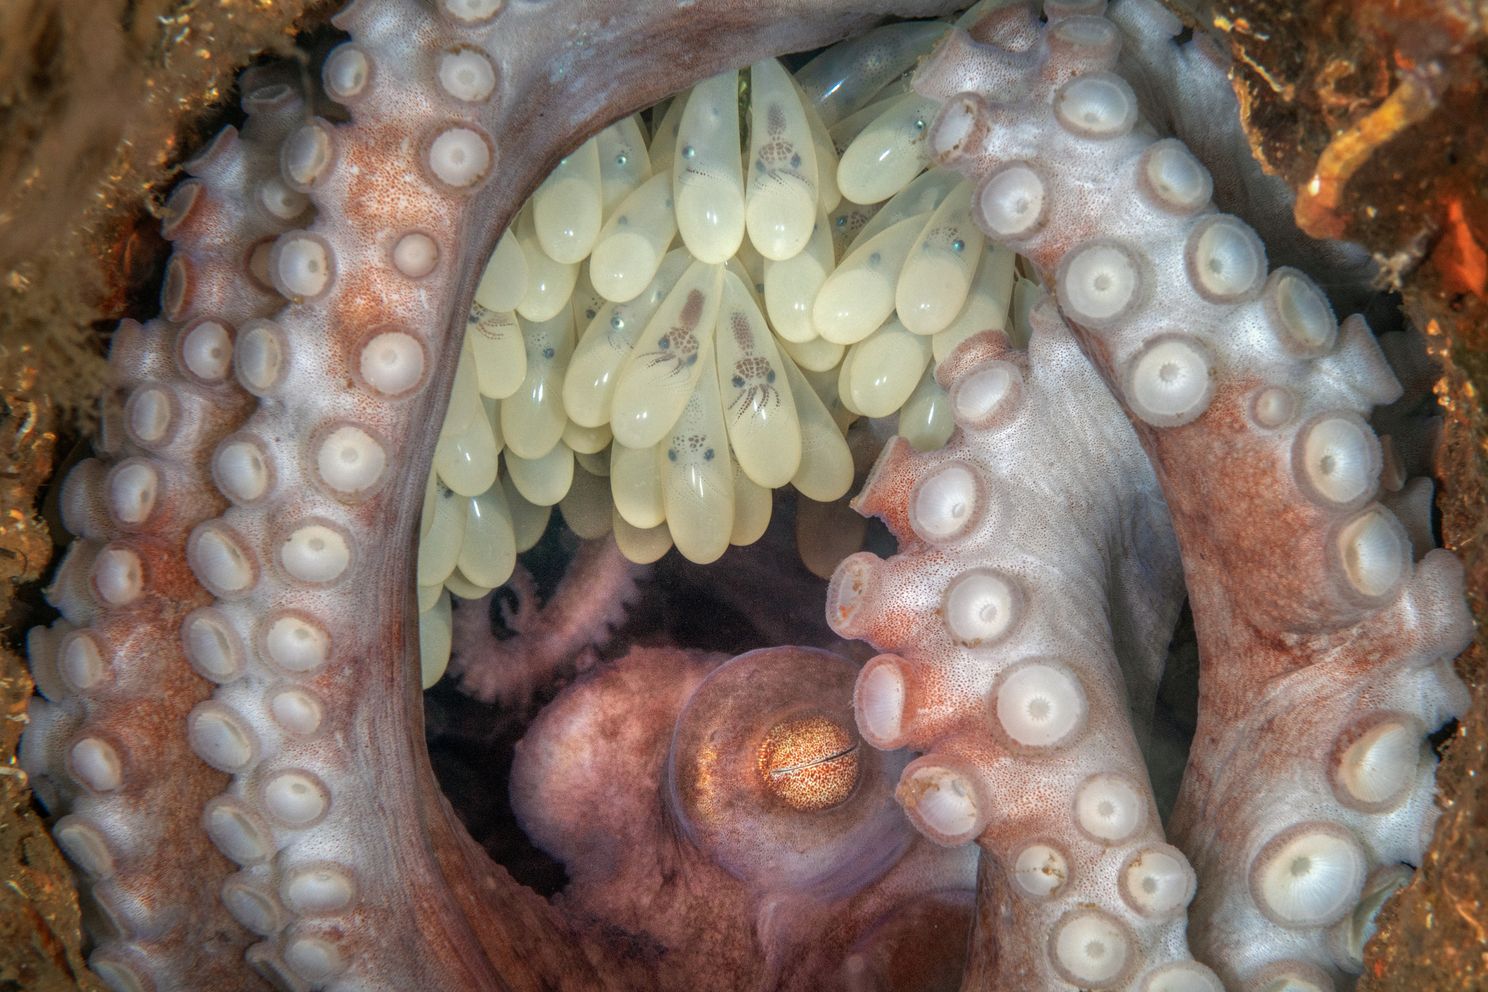 a reef octopus with hundreds of eggs with developing baby octopus inside